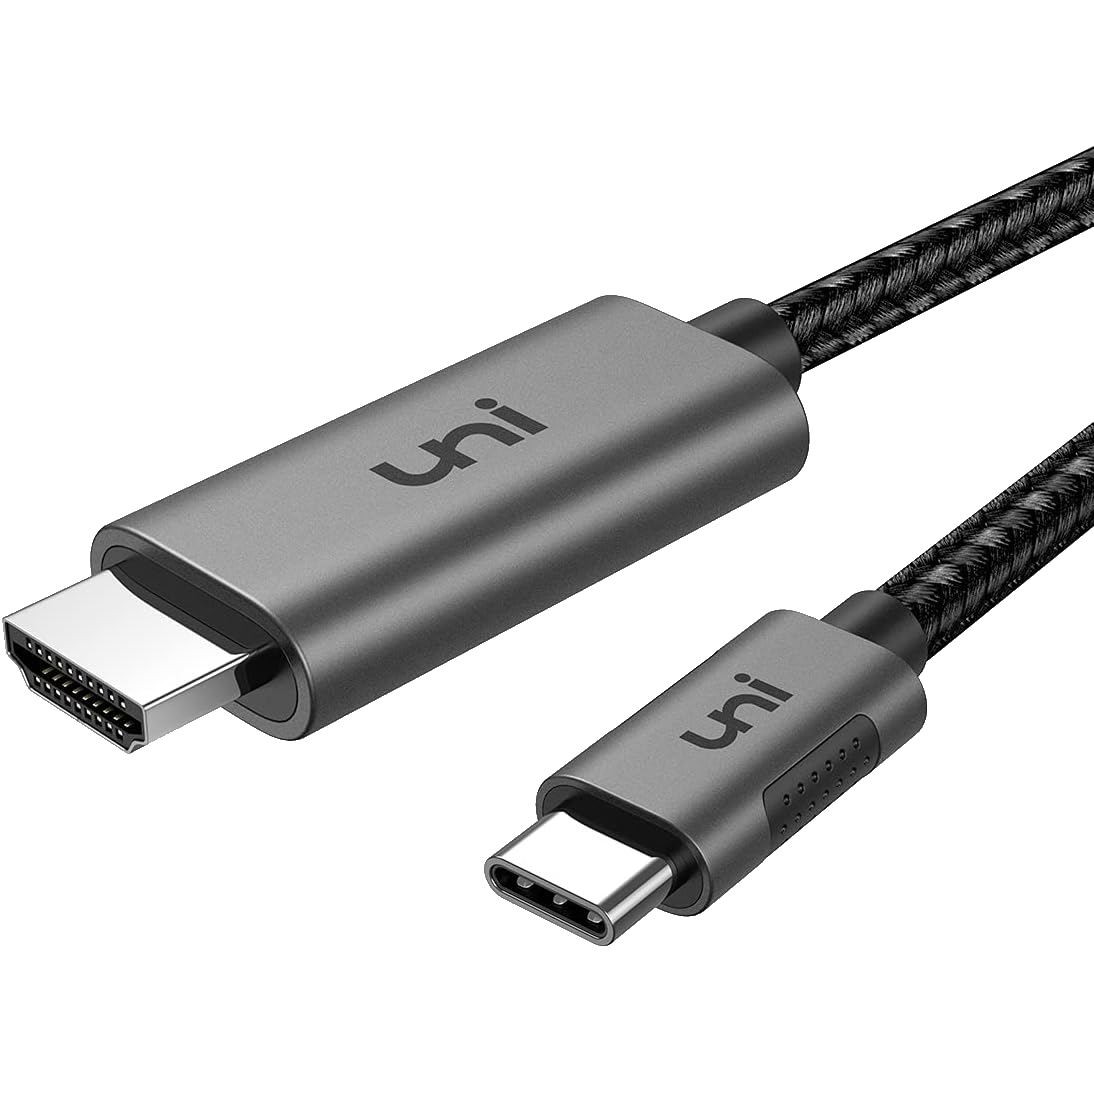 Uni USB-C to HDMI Cable